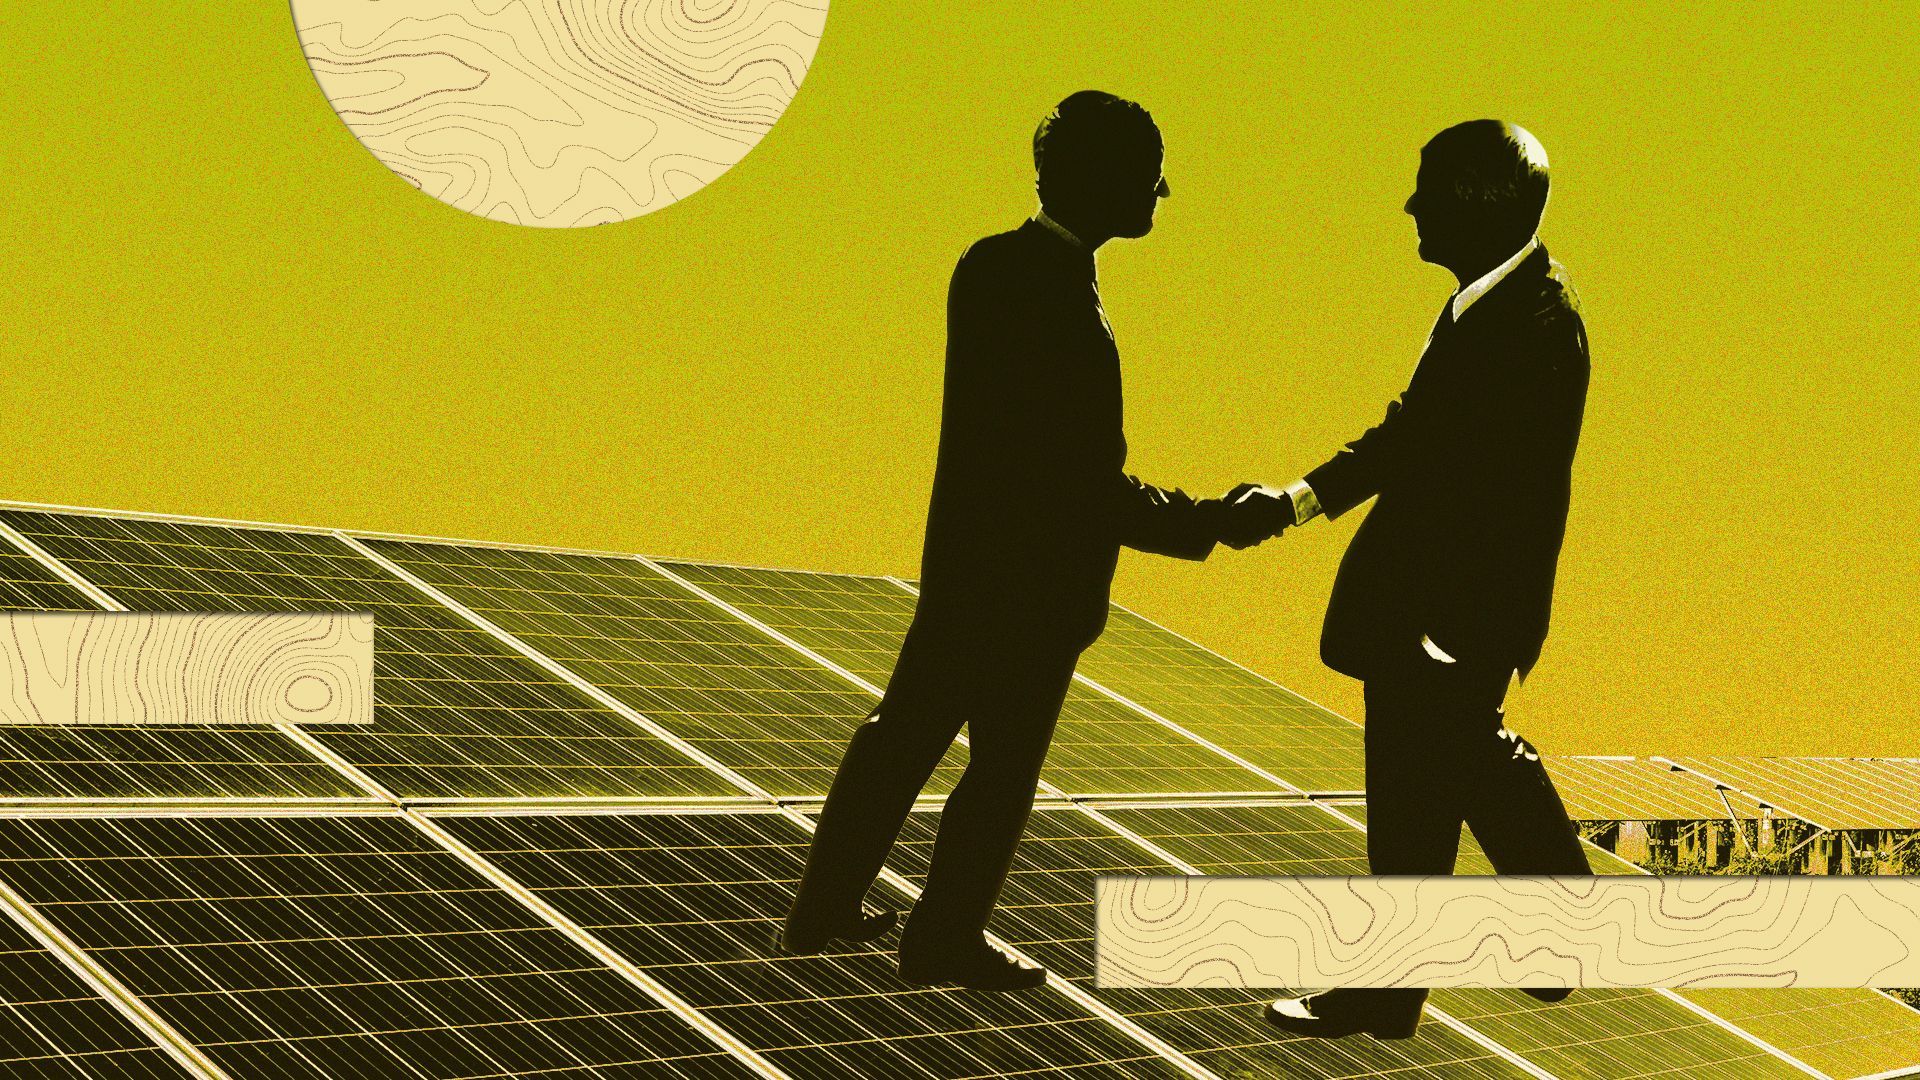 Photo illustration of two businessmen shaking hands with abstract shapes.